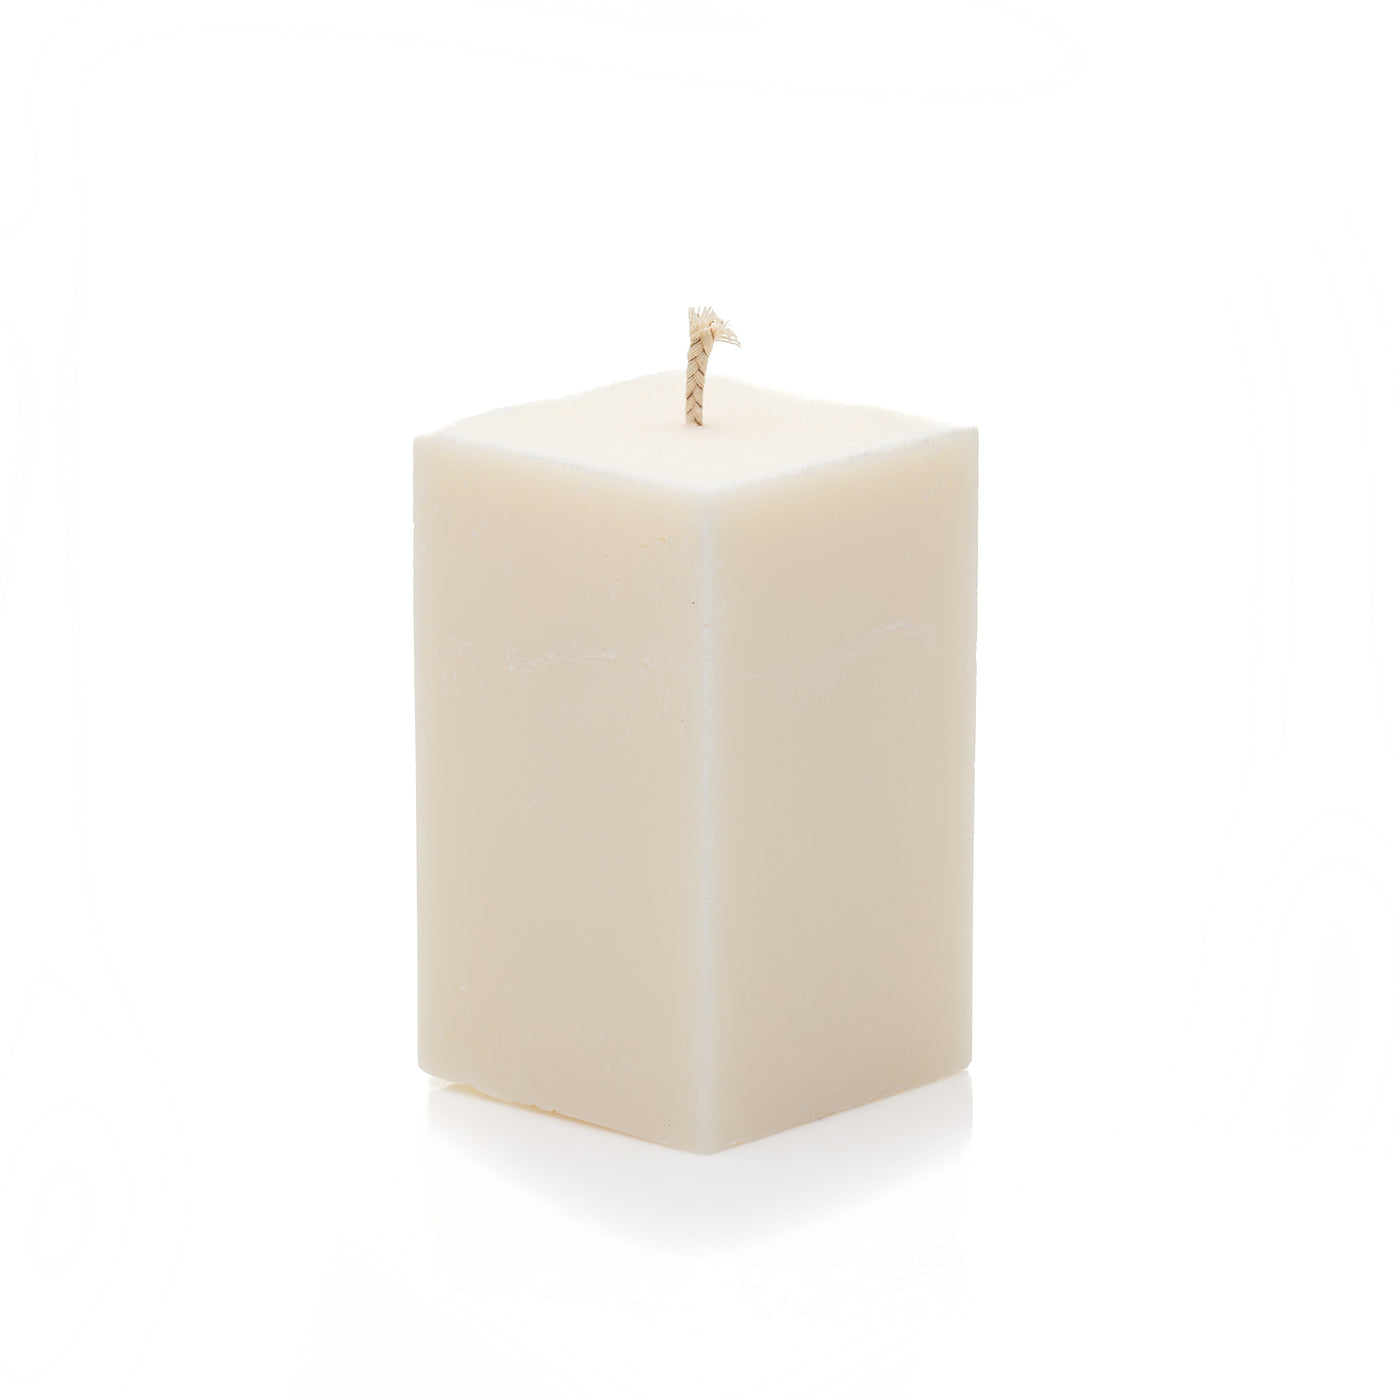 LE LUX DE VERSAILLES "Naked" scented candle